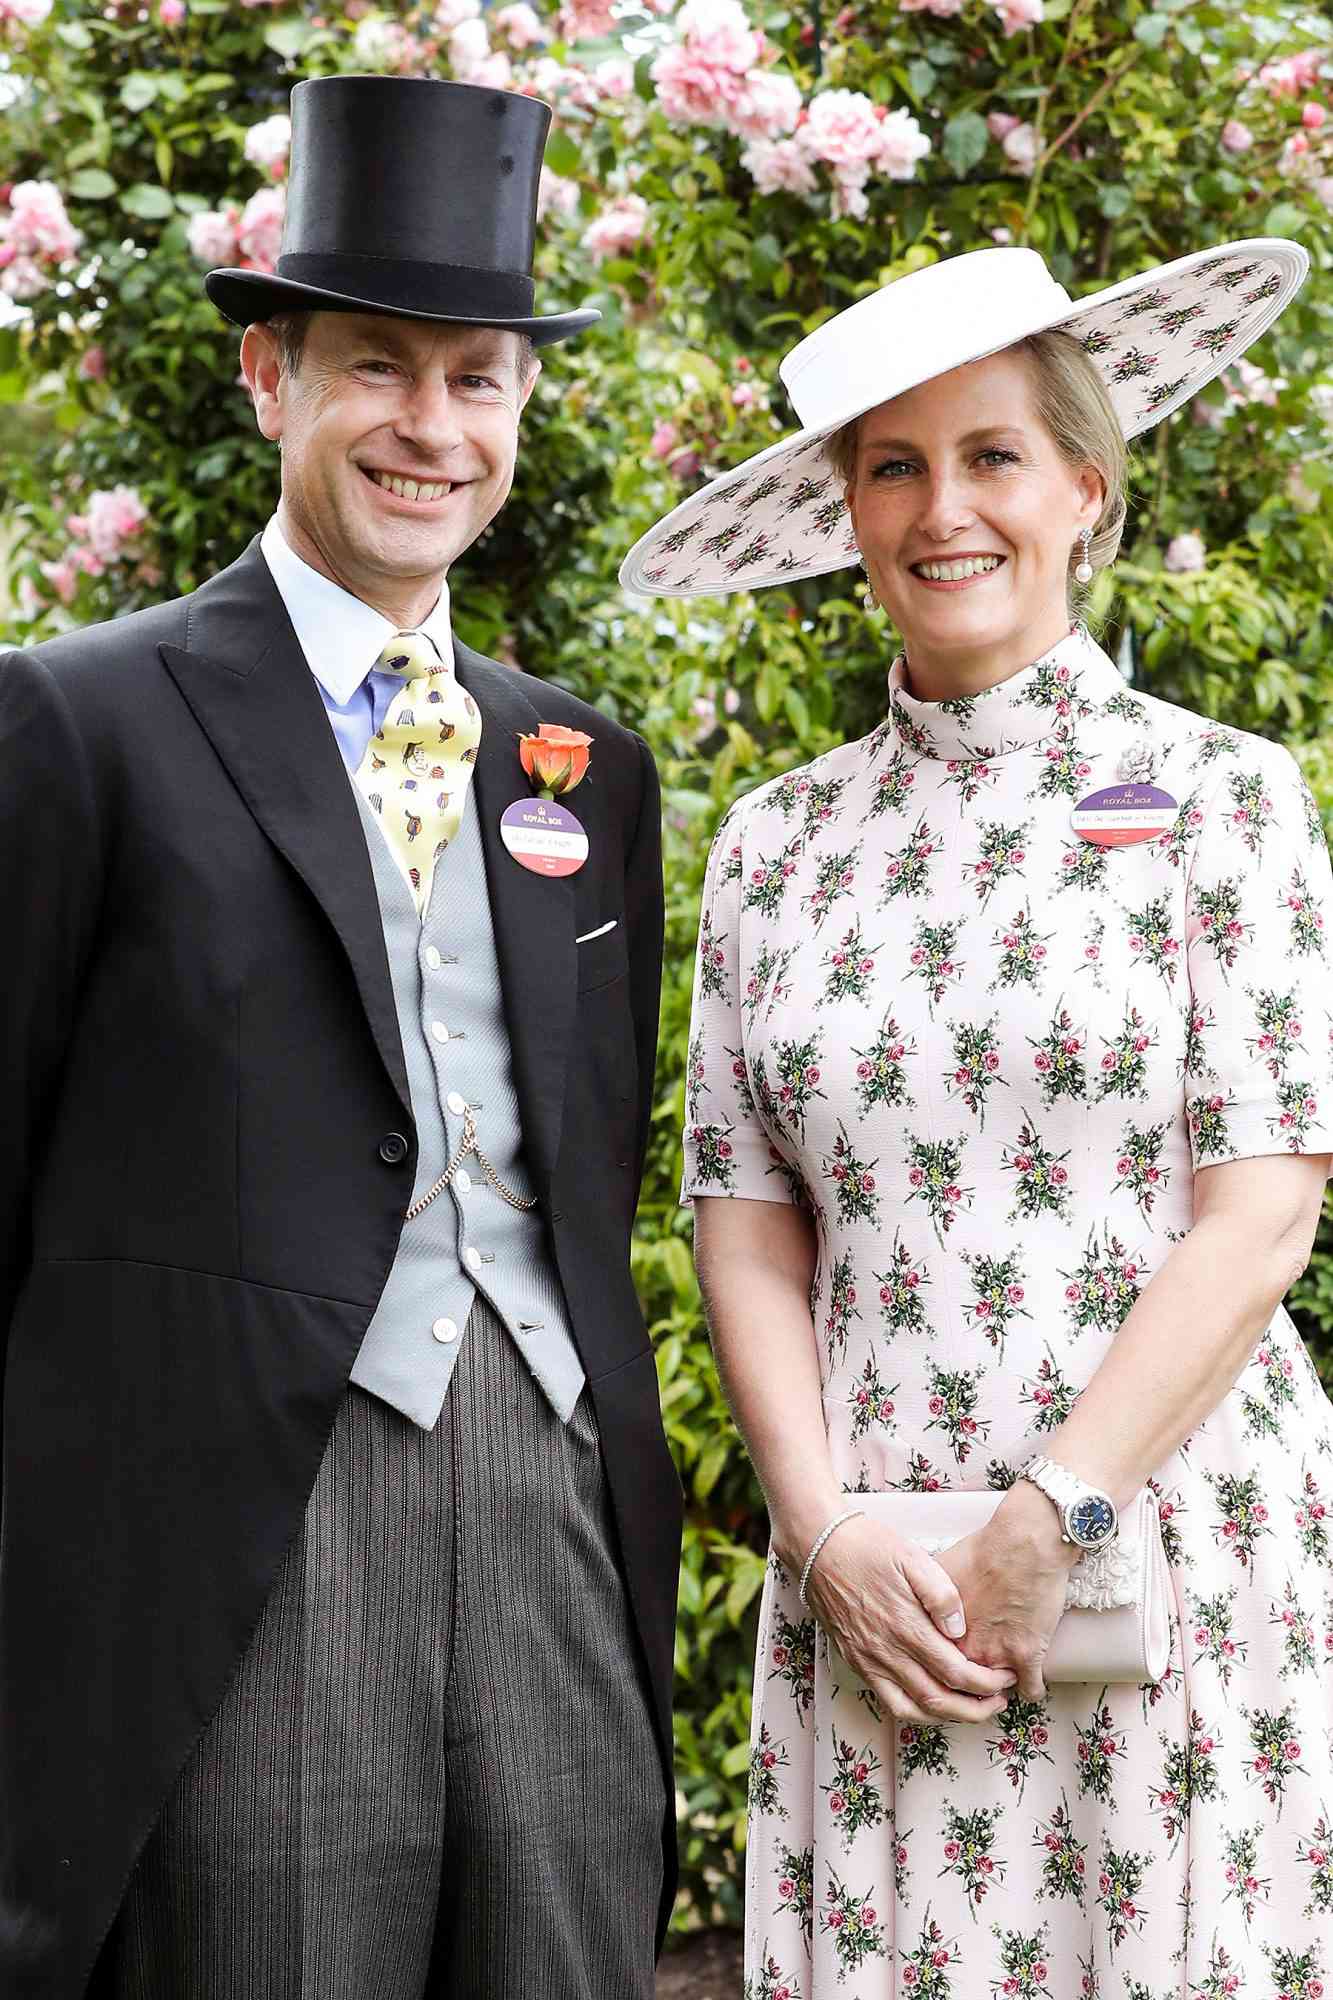 Prince Edward, Duke of Wessex and Sophie, Countess of Wessex